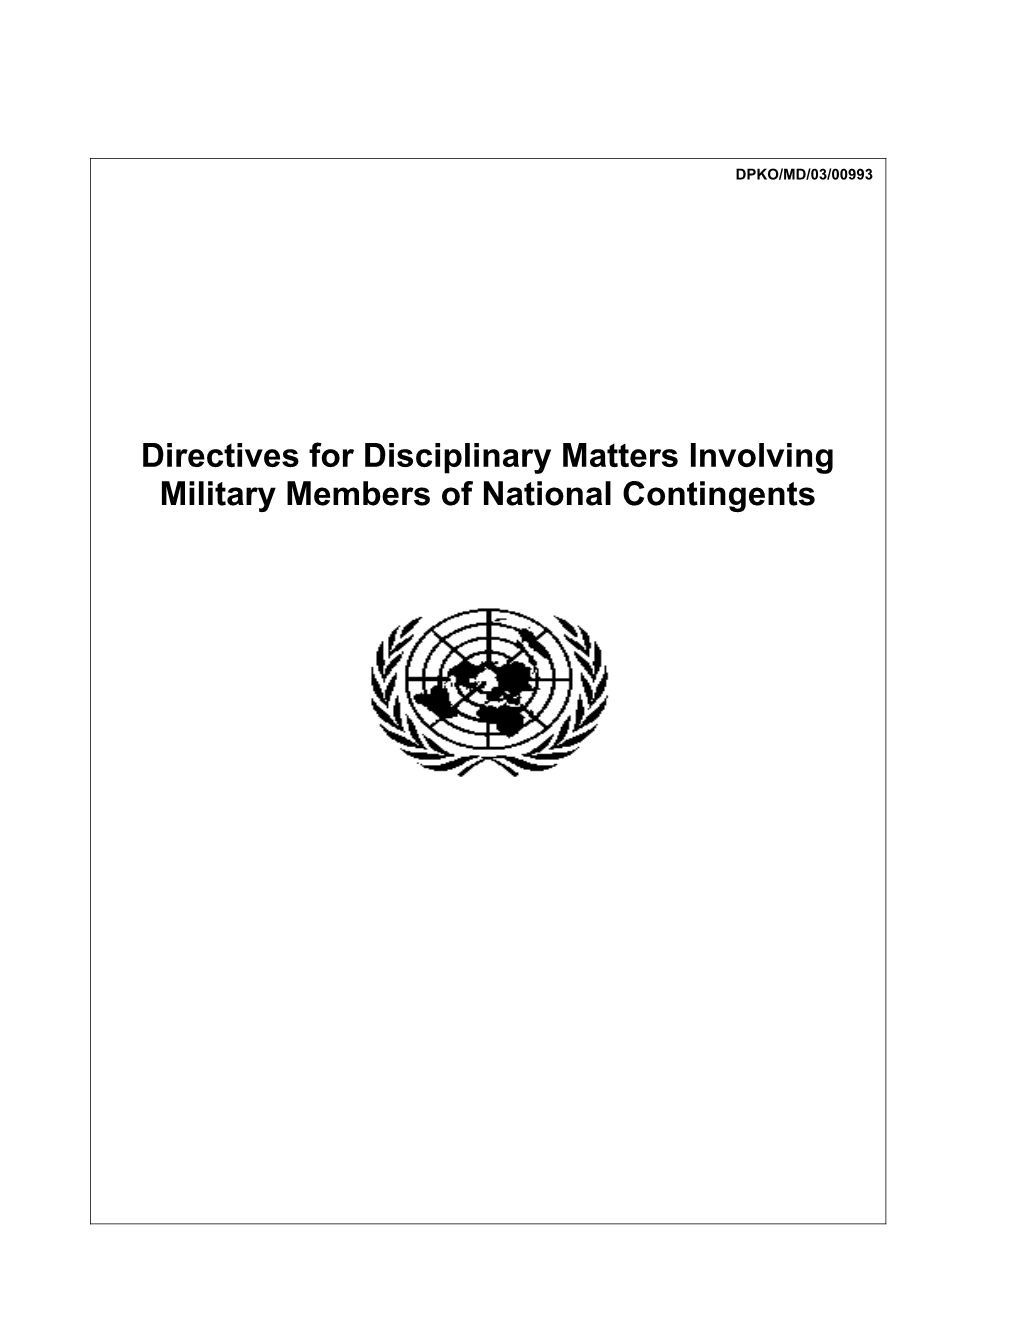 Guidelines for Disciplinary Matters Involving Military Component Personnel